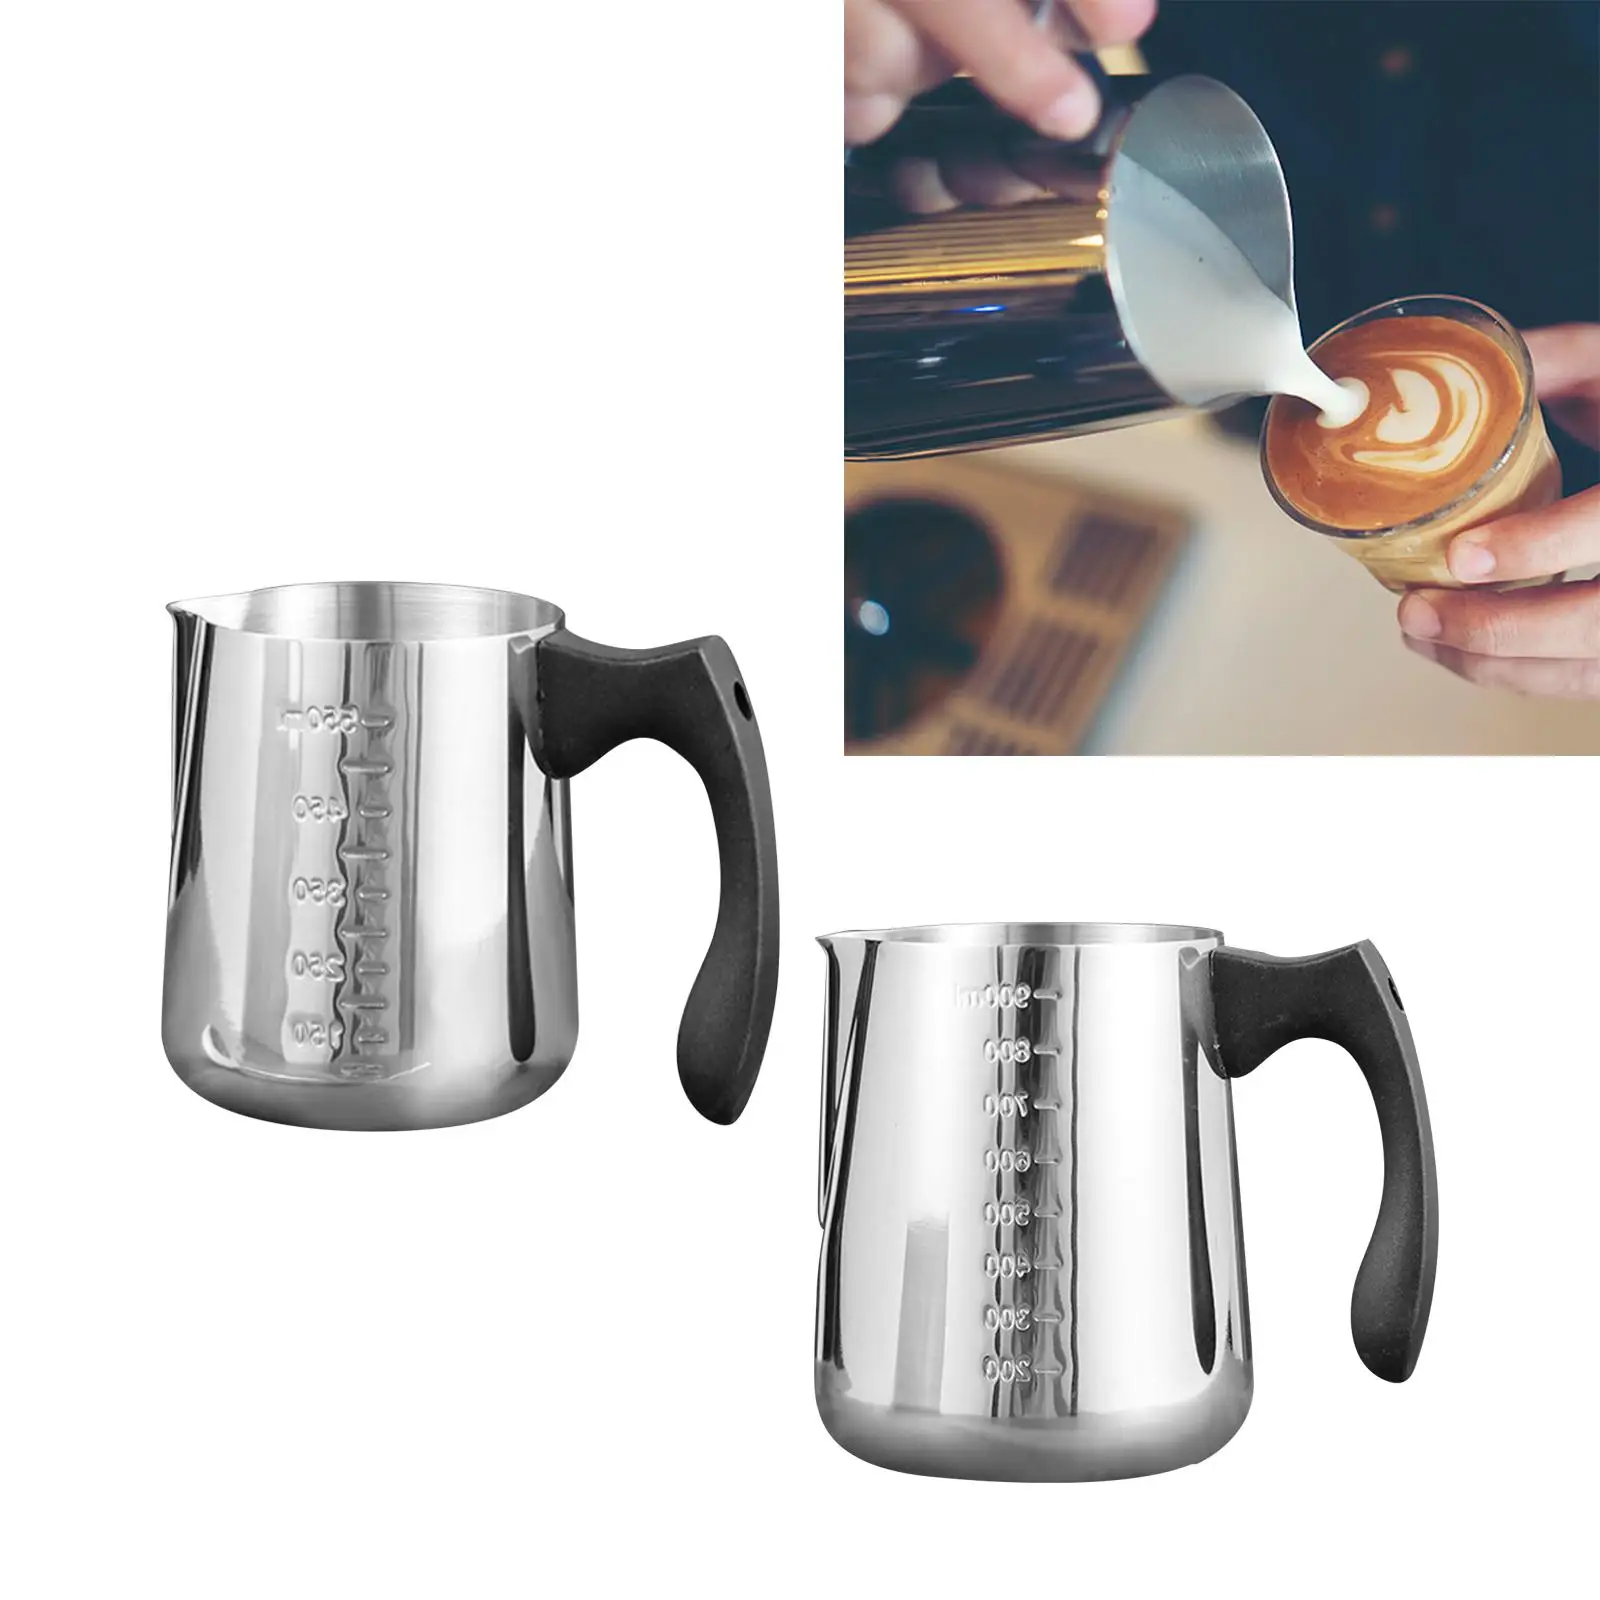 Multifunctional Milk Frothing Mug Frother Steamer Cup Espresso Steaming Cups